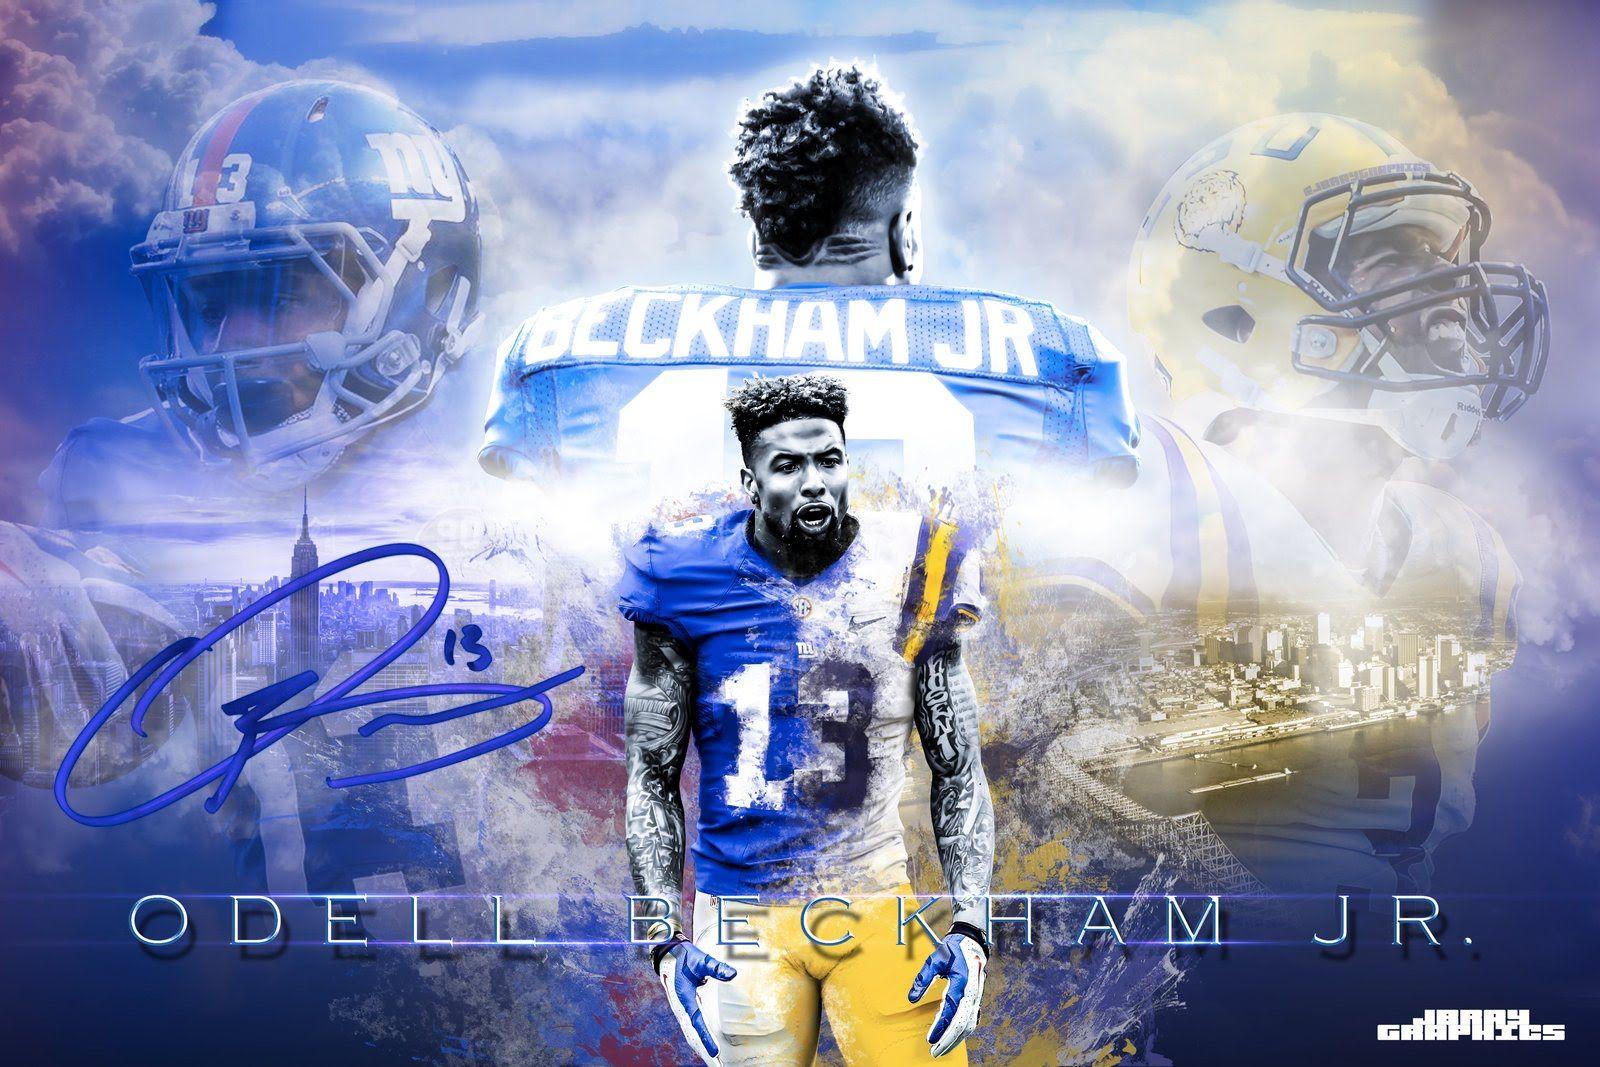 LOOK Odell Beckham Jr in full Rams uniform is a sight to see